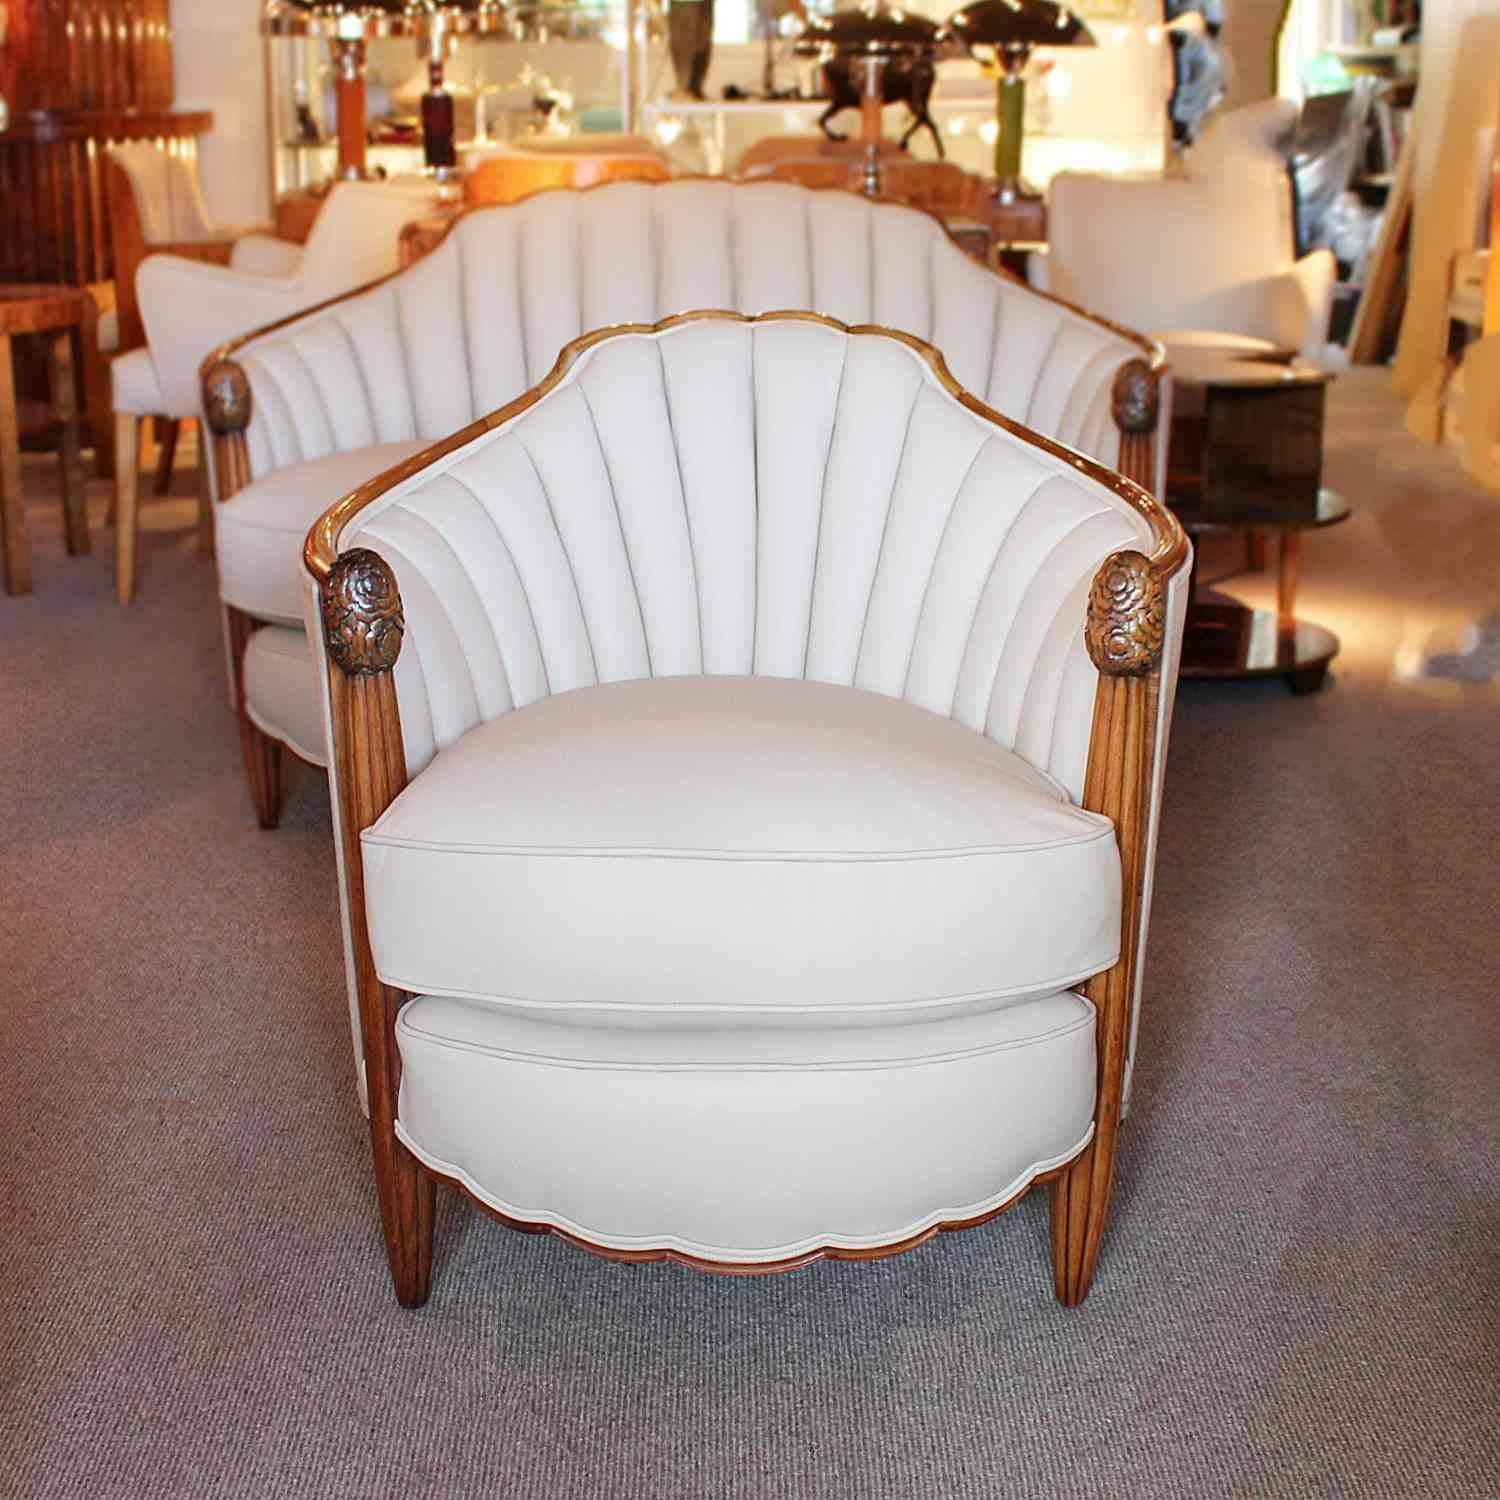 An Art Deco three piece suite comprising two seater settee and two armchairs. Solid walnut frames with tapering legs to front and carved detail. Iconic Süe et Mare scalloped edging throughout. Upholstered in cream leather and Alcantara